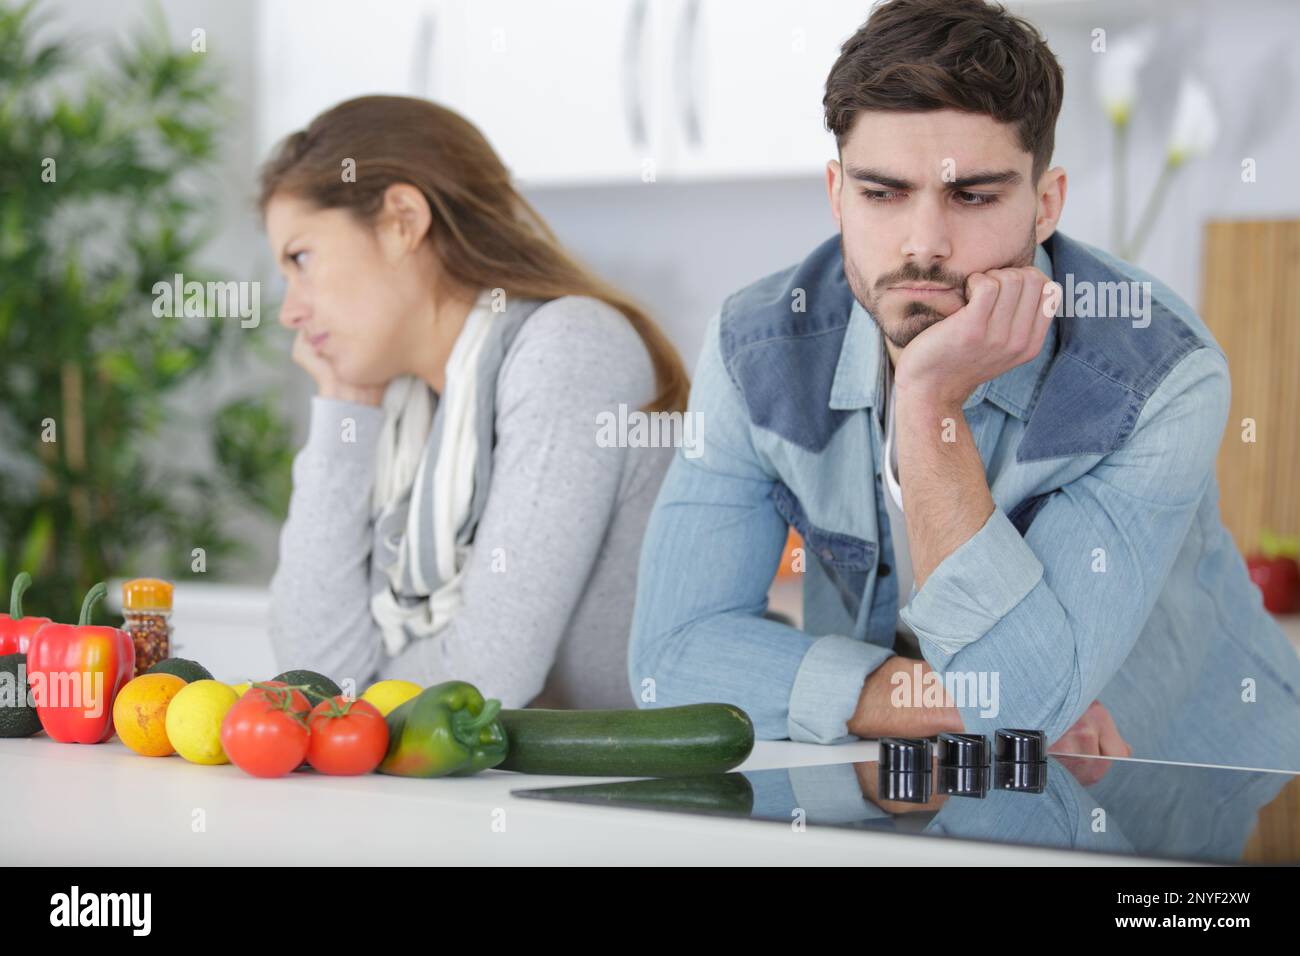 couple having an argument in the kitchen Stock Photo